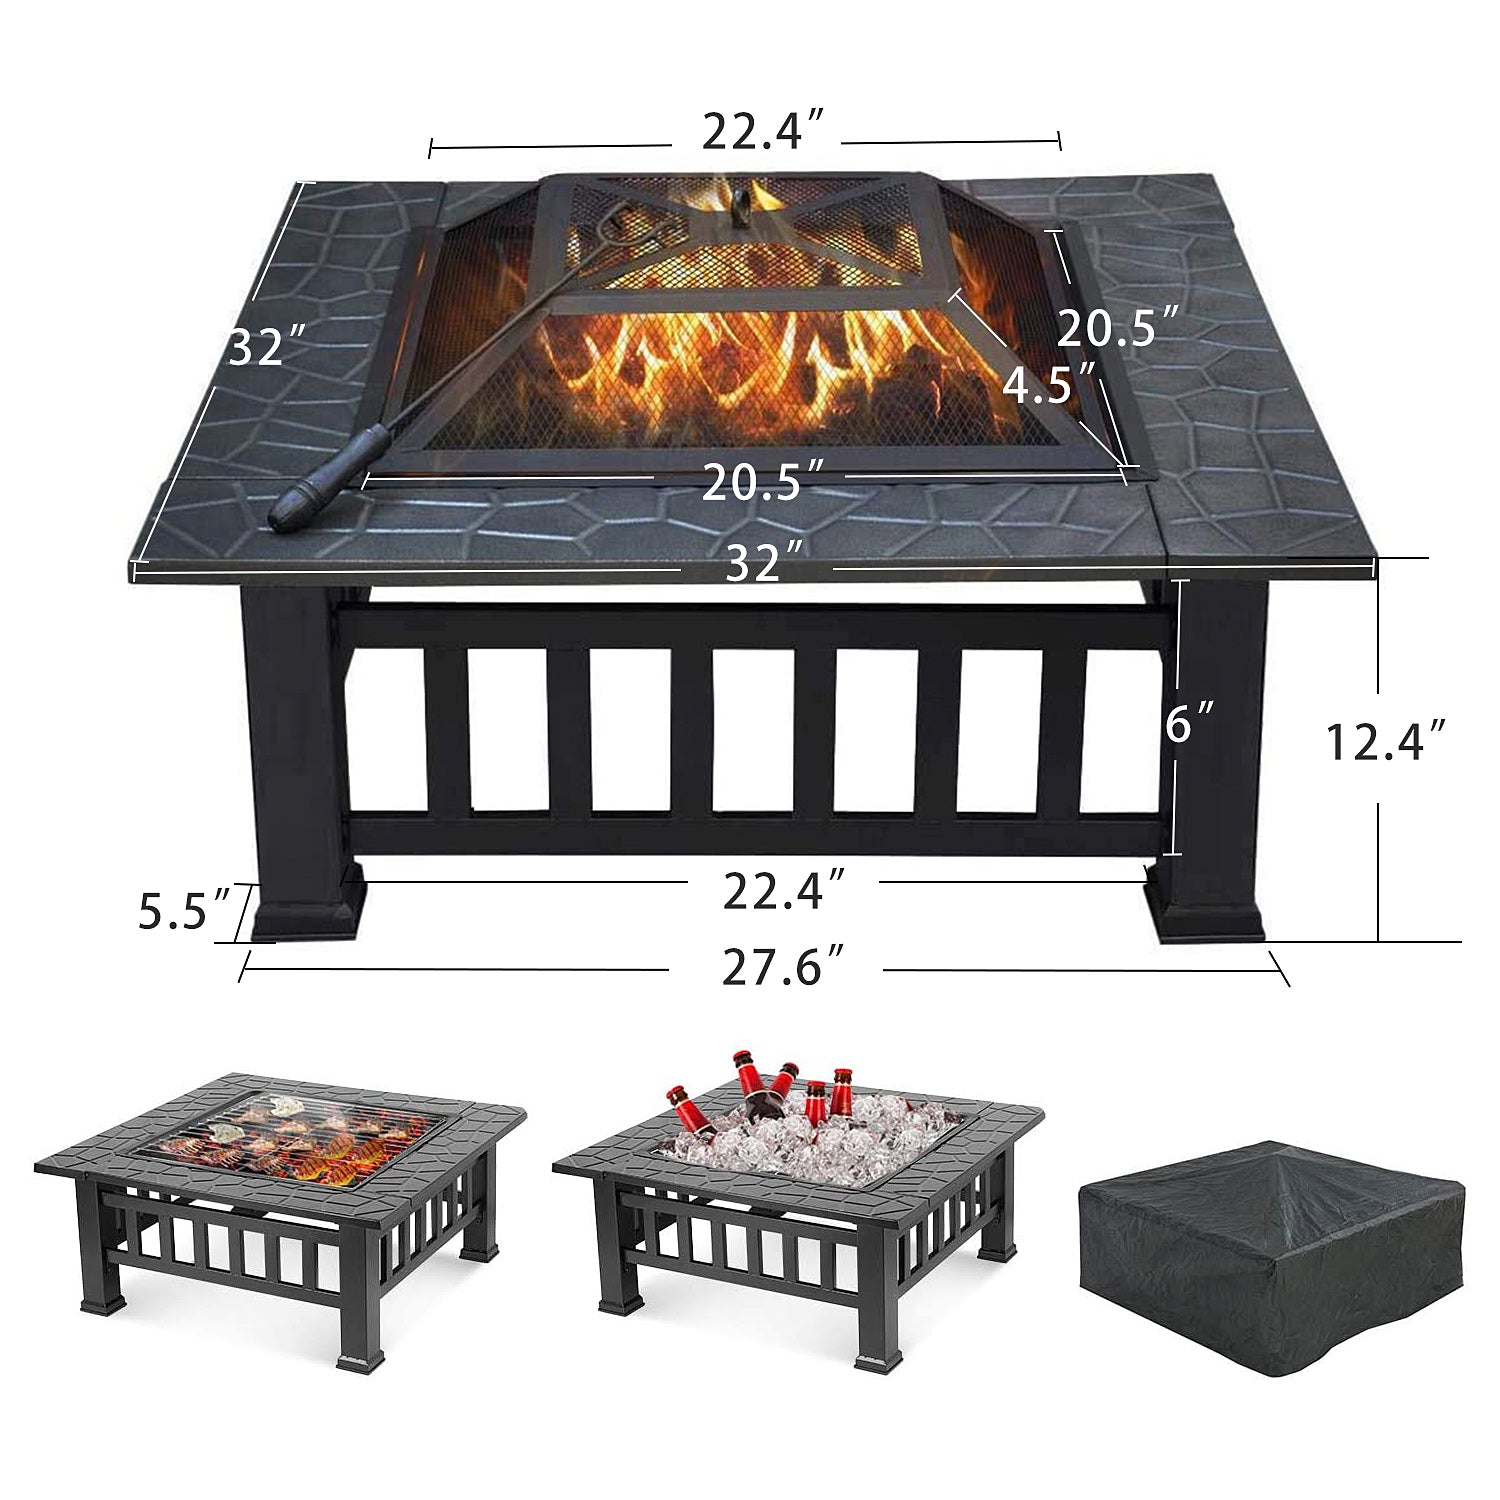 RaDEWAYY Upland Charcoal Fire Pit with Cover